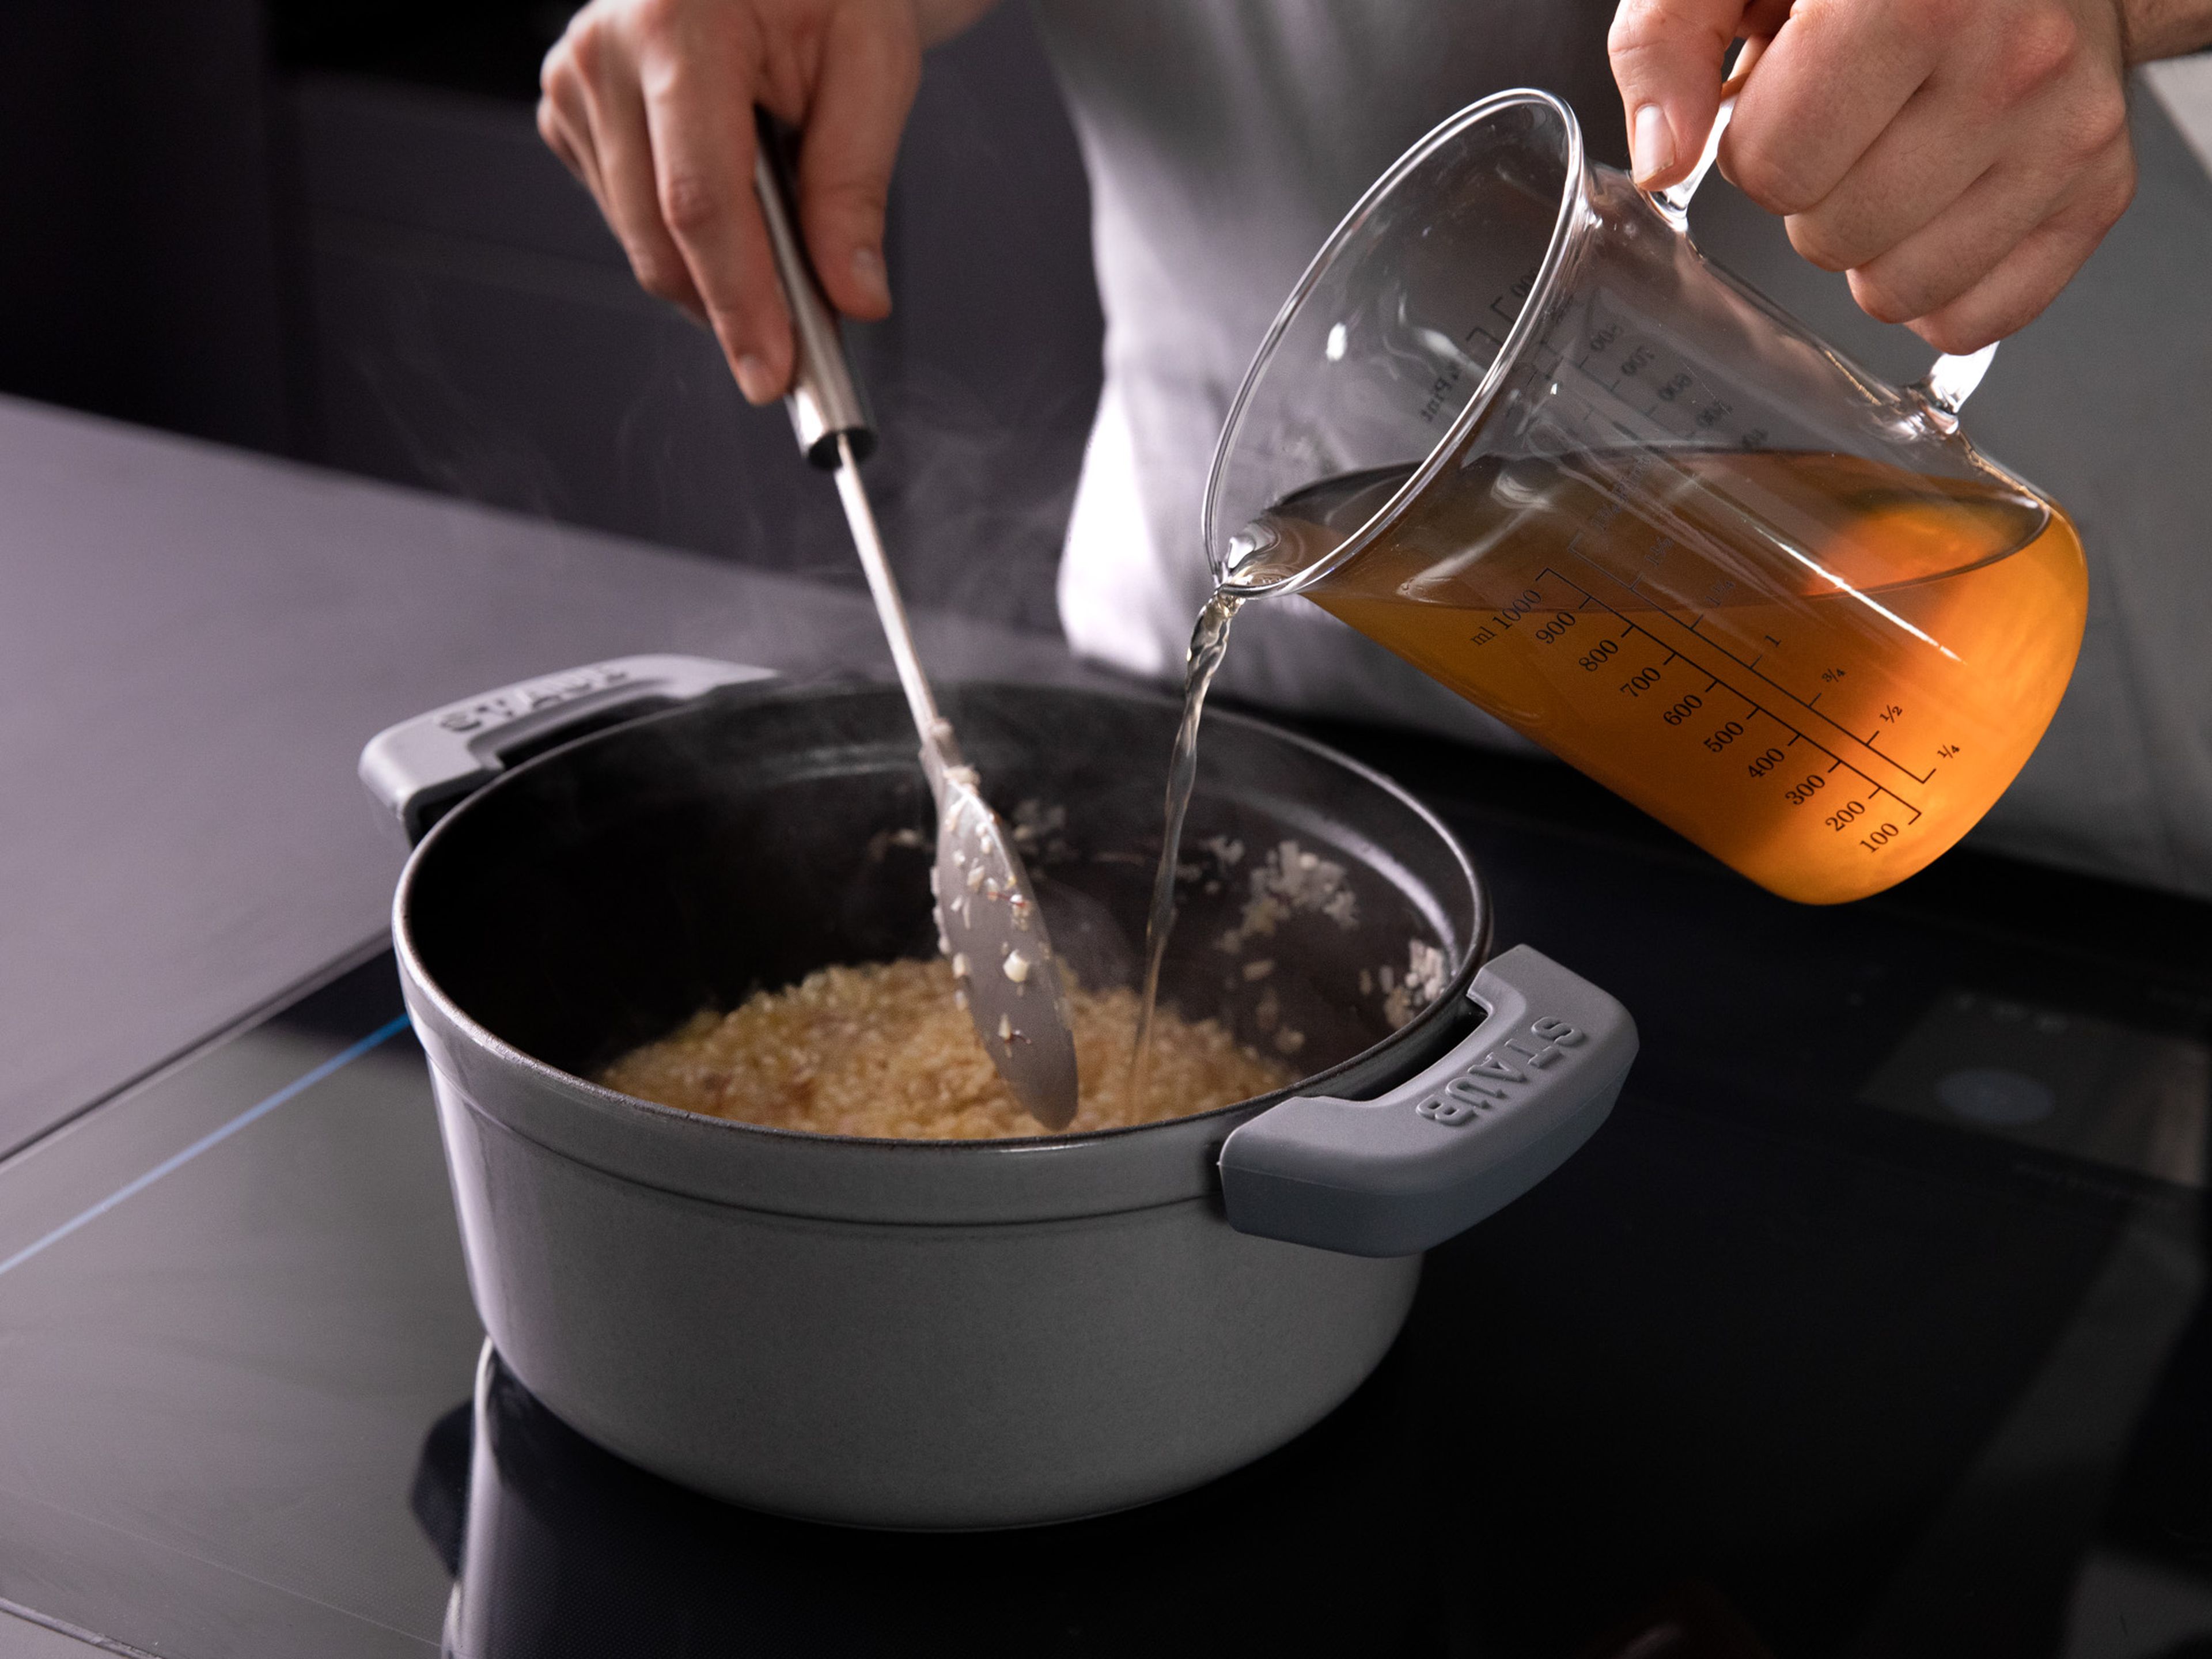 Deglaze with white wine. Stir continuously until risotto has fully absorbed wine. Add one-third of the beef stock to the pot and stir until fully absorbed. Repeat this process twice with the remaining beef stock. Cook, stirring constantly, until risotto is creamy but rice is still al dente, approx. 18–20 min.